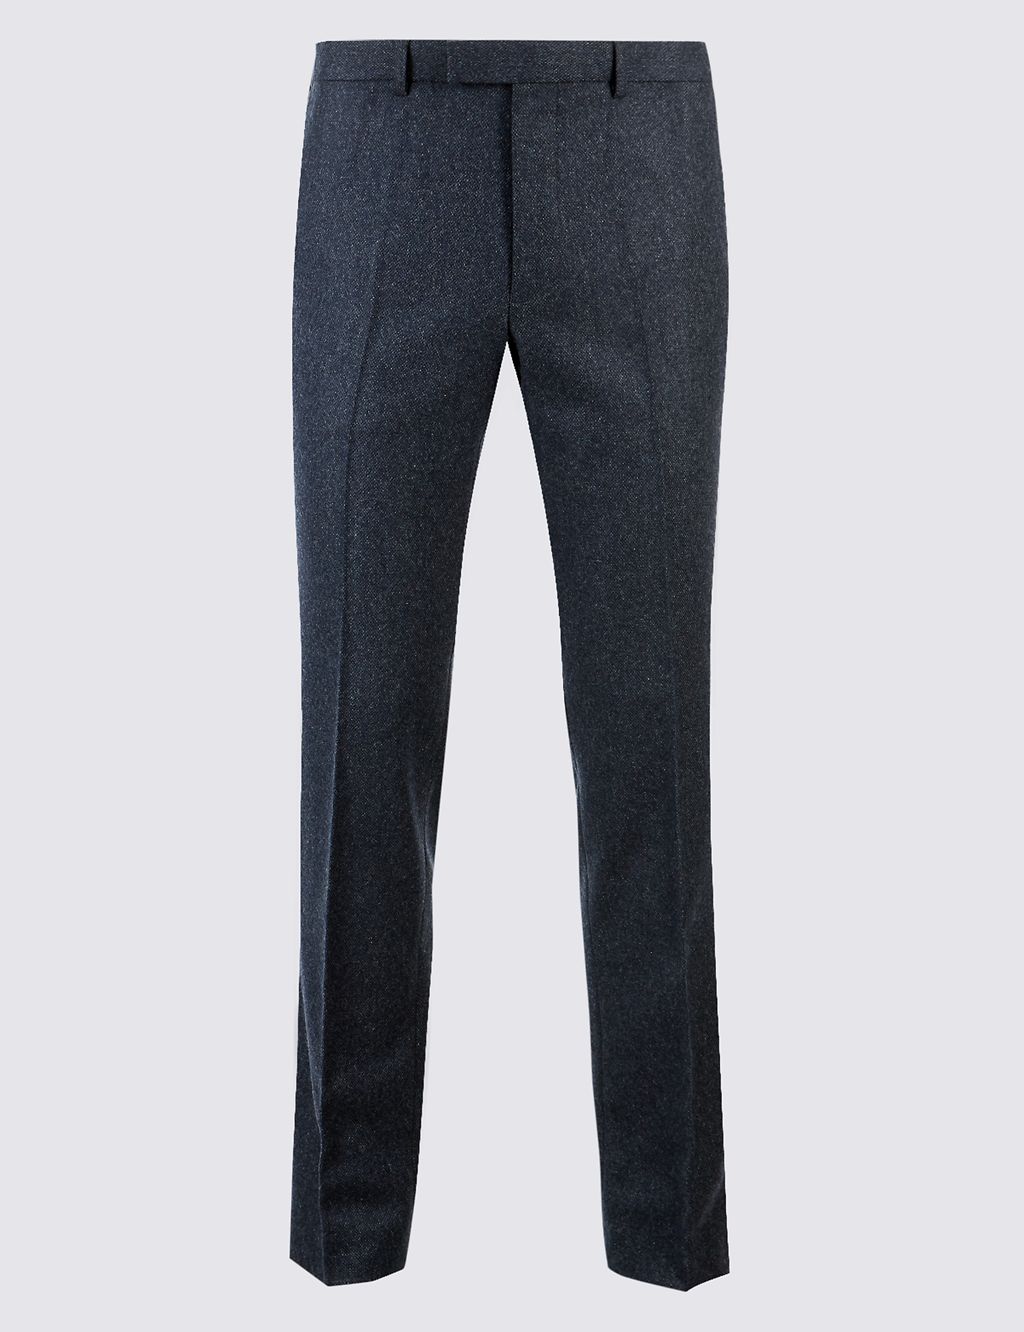 Wool Blend Slim Fit Trousers with Italian Fabric 1 of 5